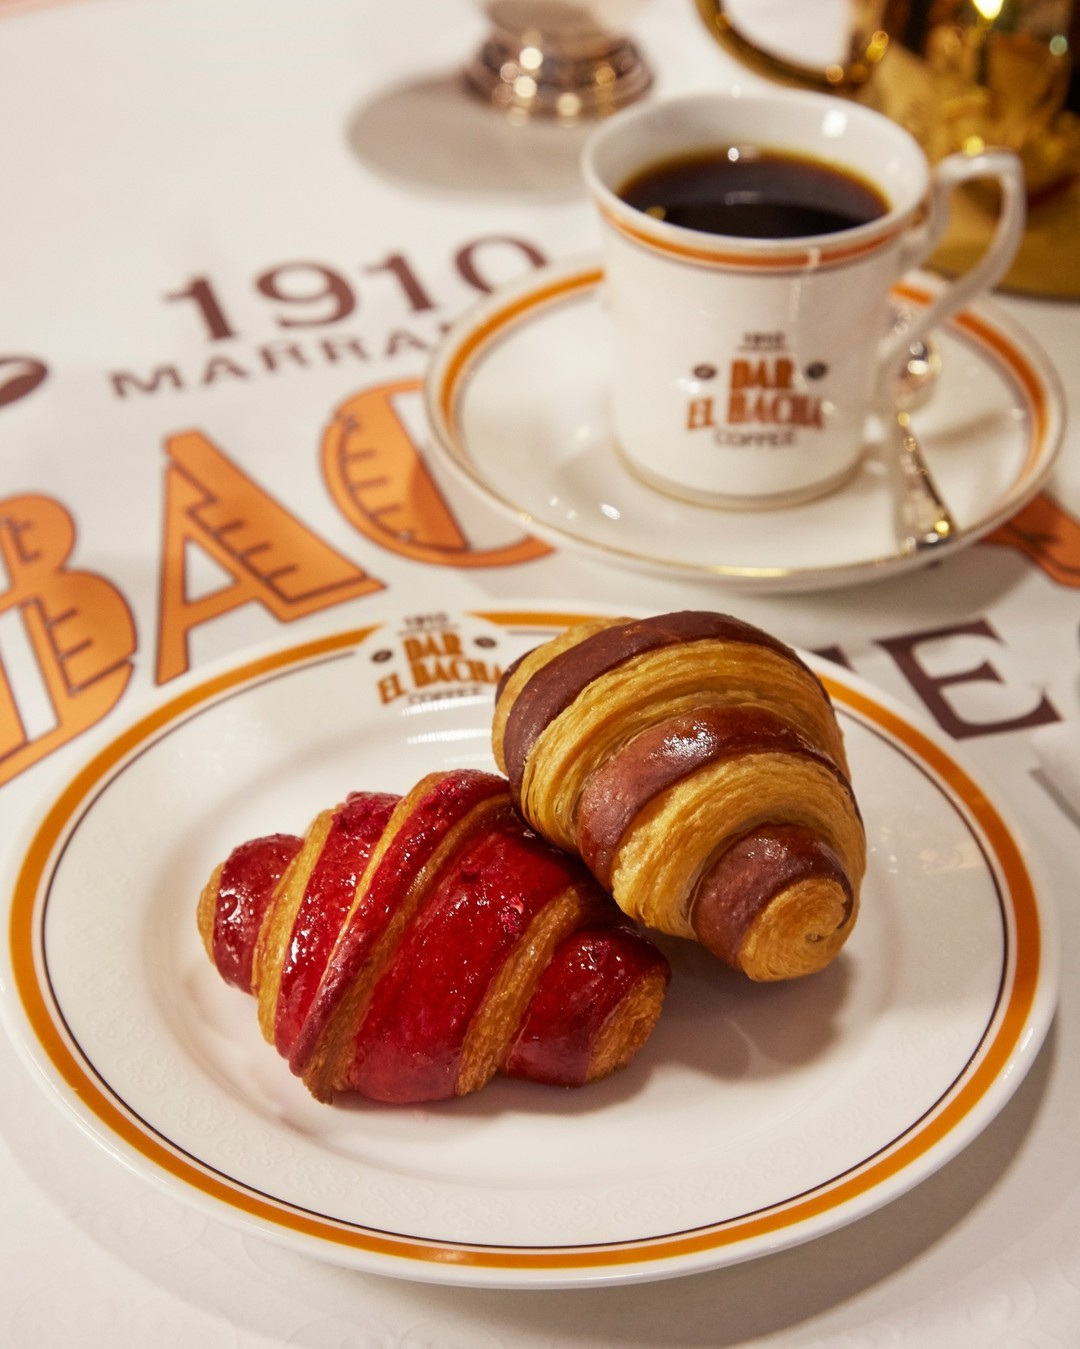 bacha coffee croissant on plate